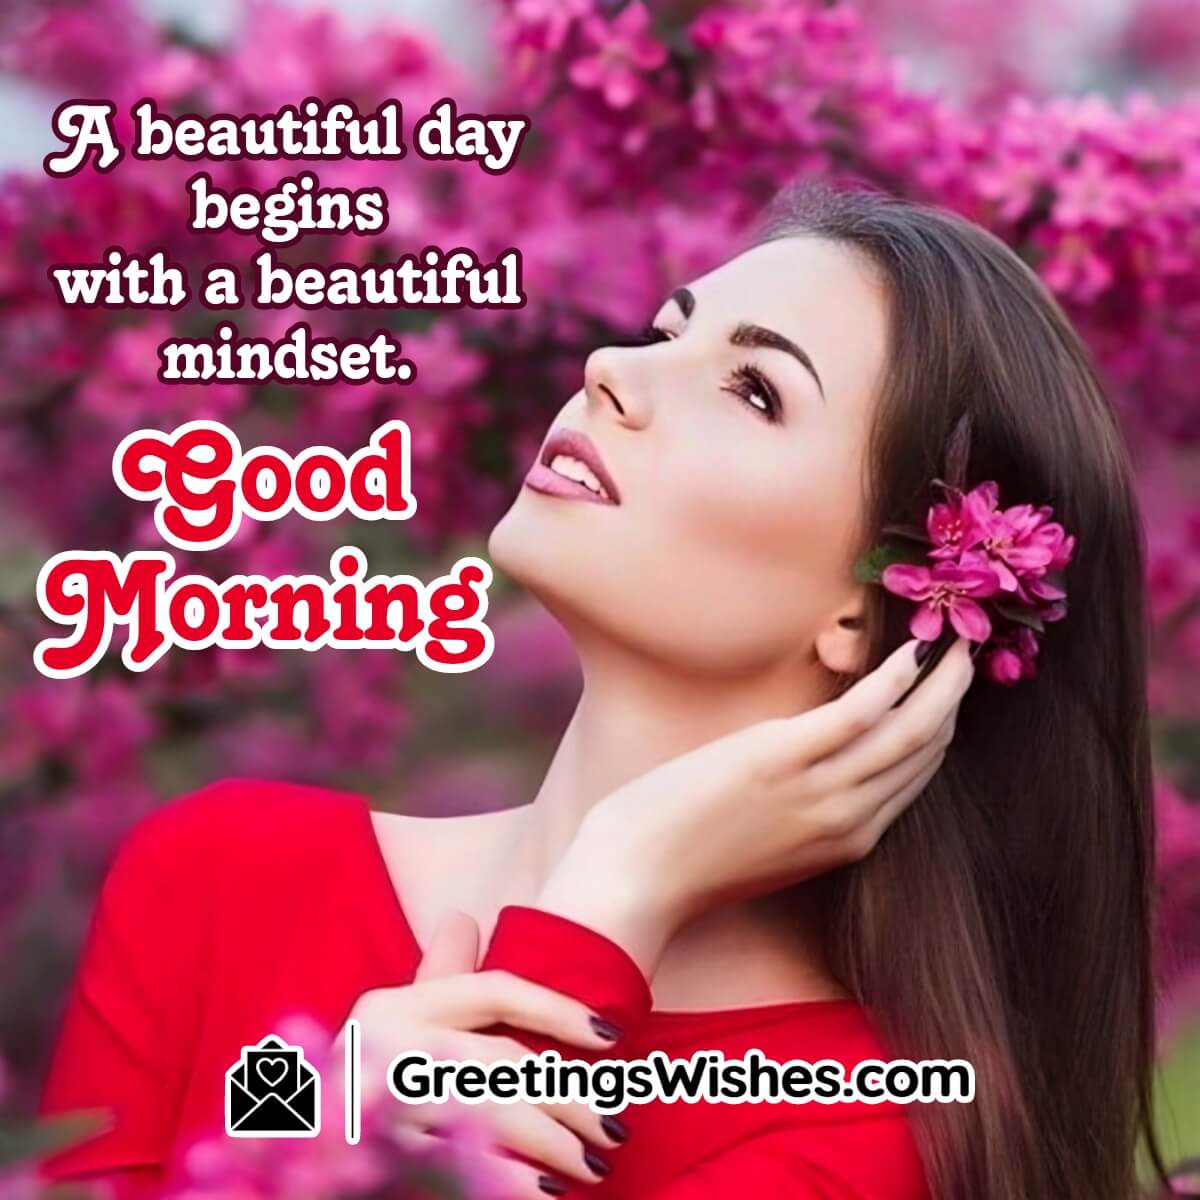 Good Morning Messages For Her - Greetings Wishes